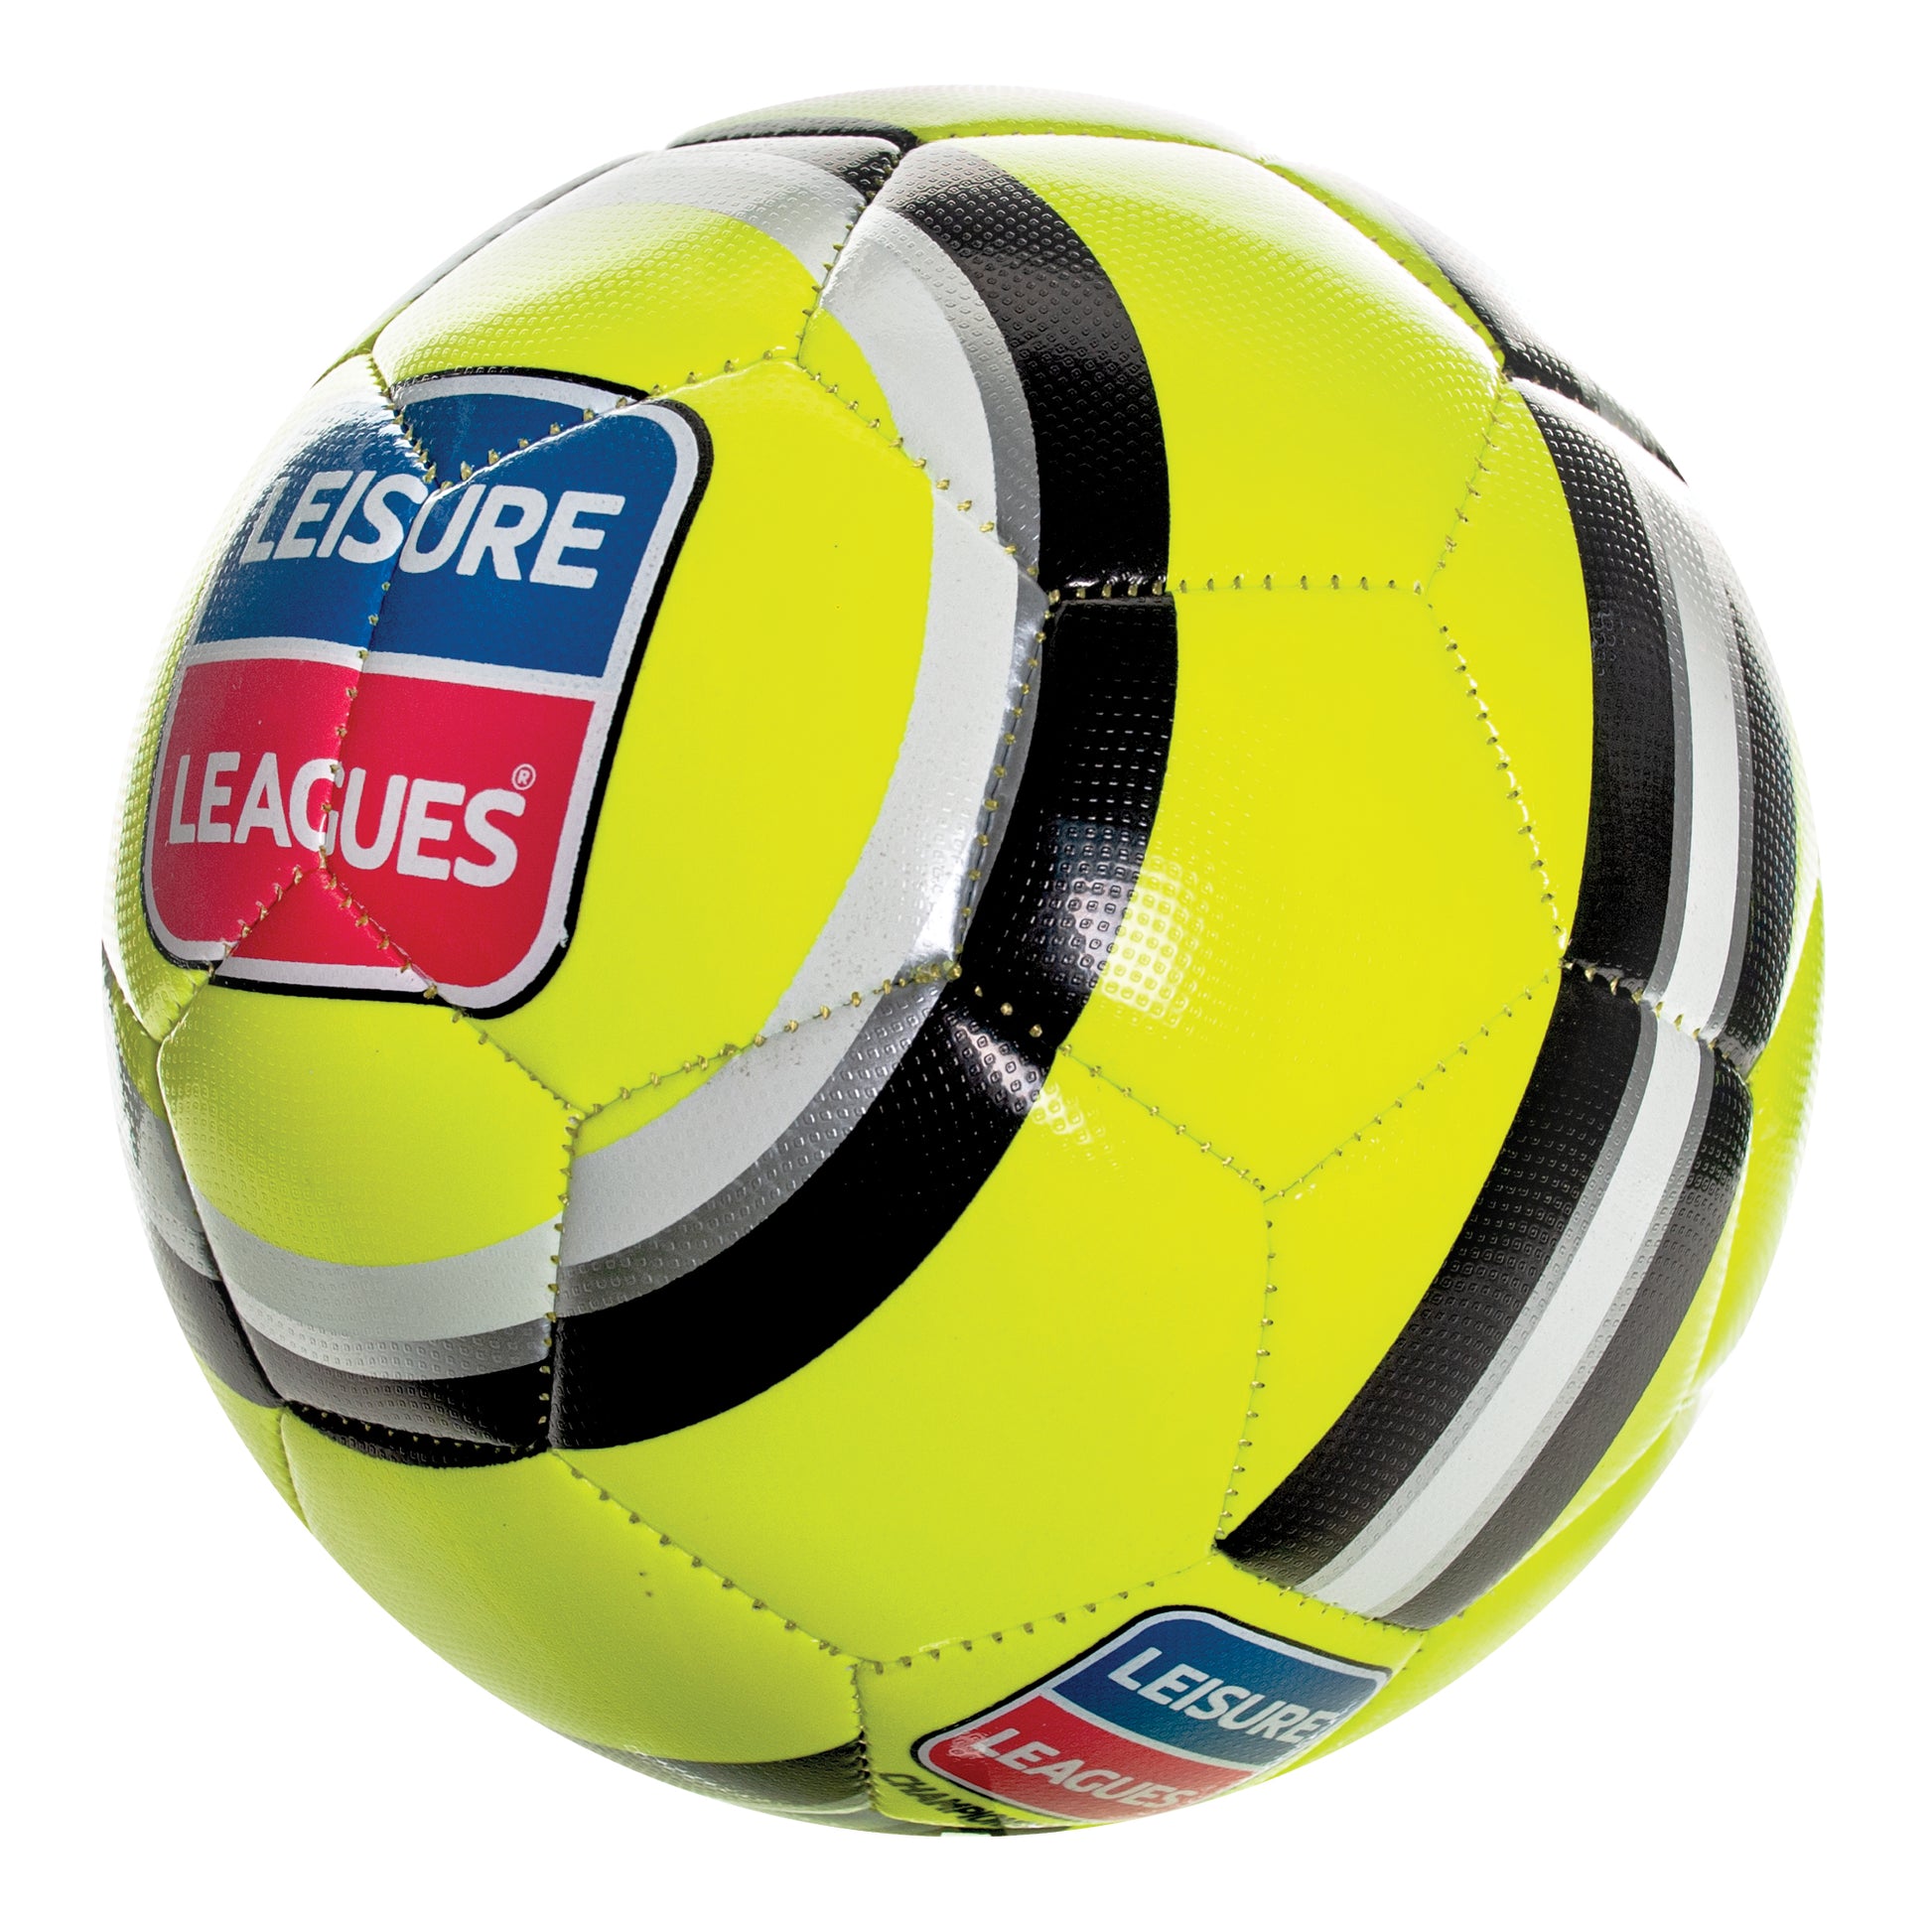 Leisure leagues football Size 5 Ball Yellow